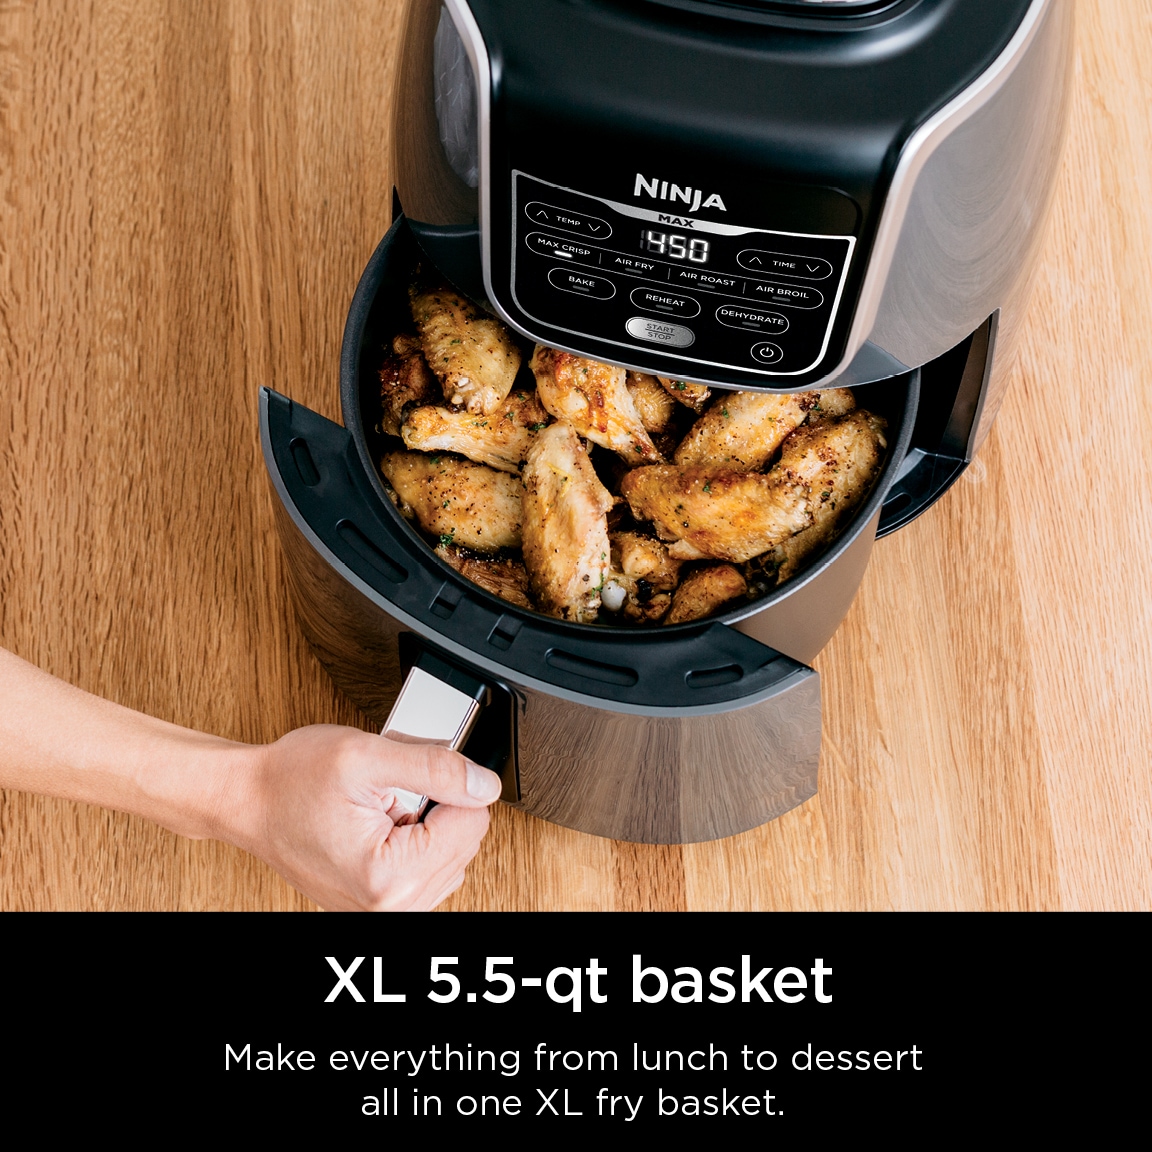  PowerXL Grill Air Fryer Combo 6 QT 12-in-1 Indoor Slow Cooker,  Roast, Bake, 1550-Watts, Stainless Steel Finish (Standard) : Home & Kitchen